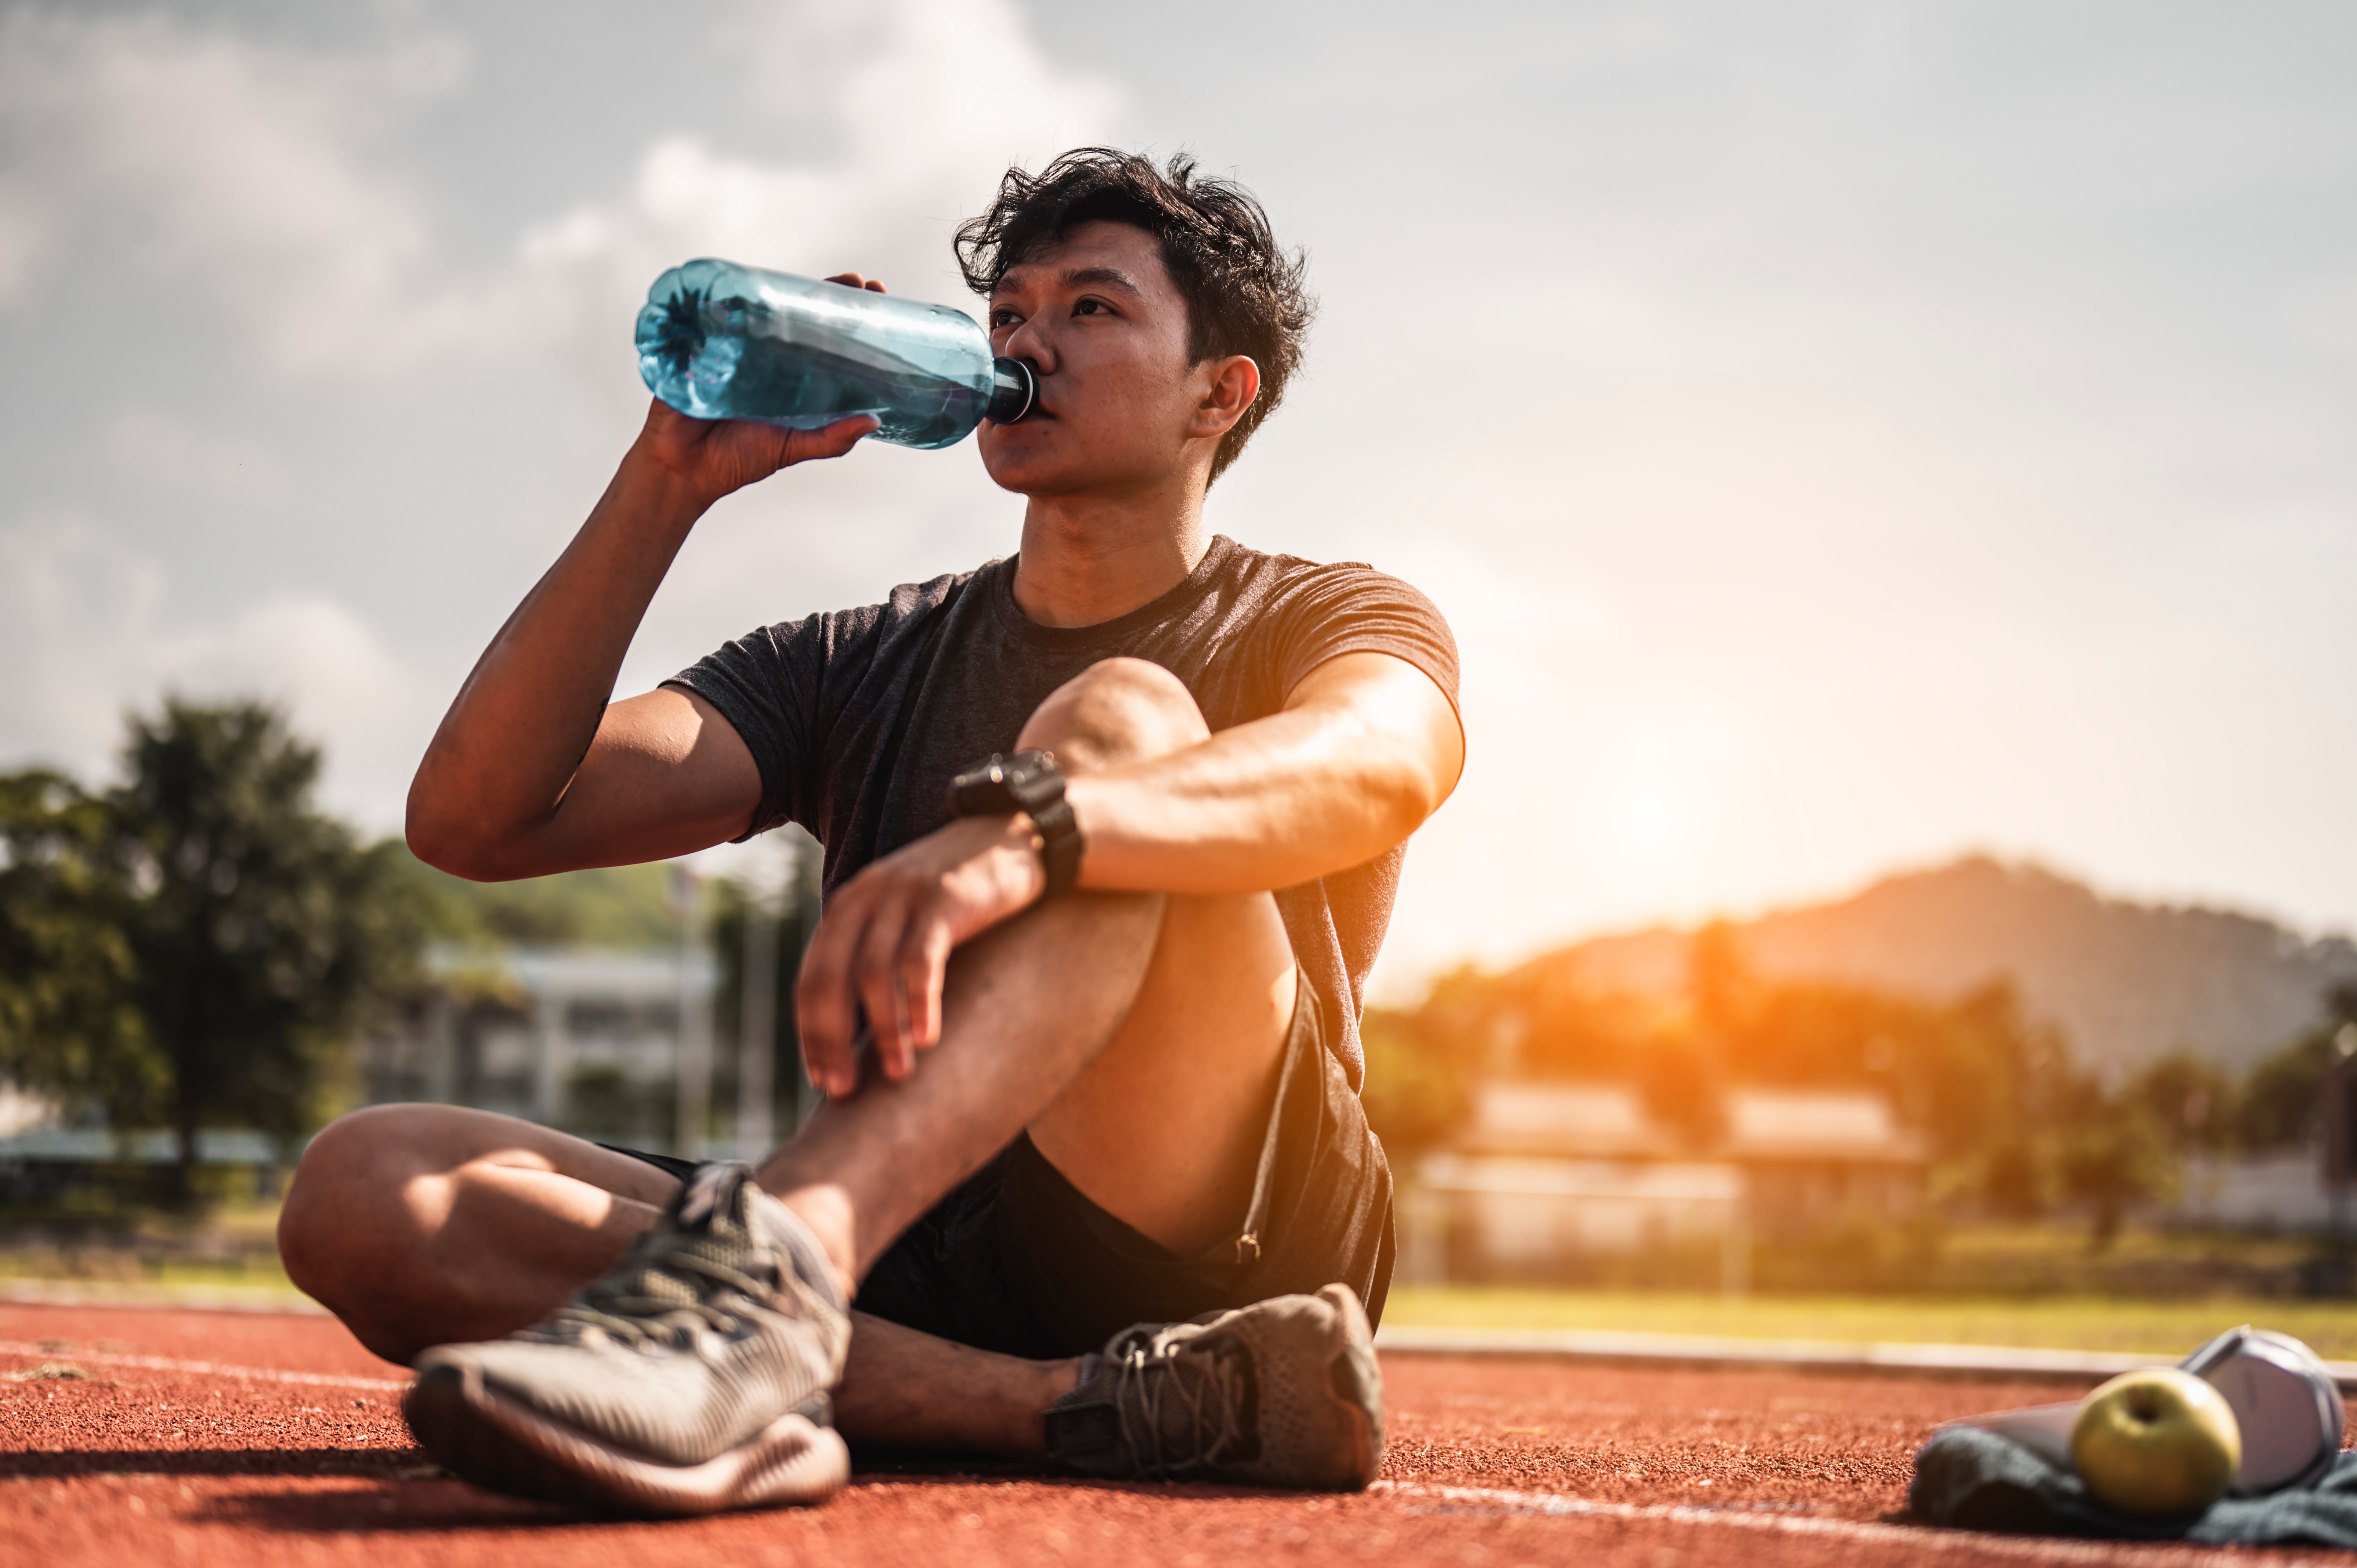 The young man wore all parts of his body and drink water to prepare for jogging on the running track around the football field.